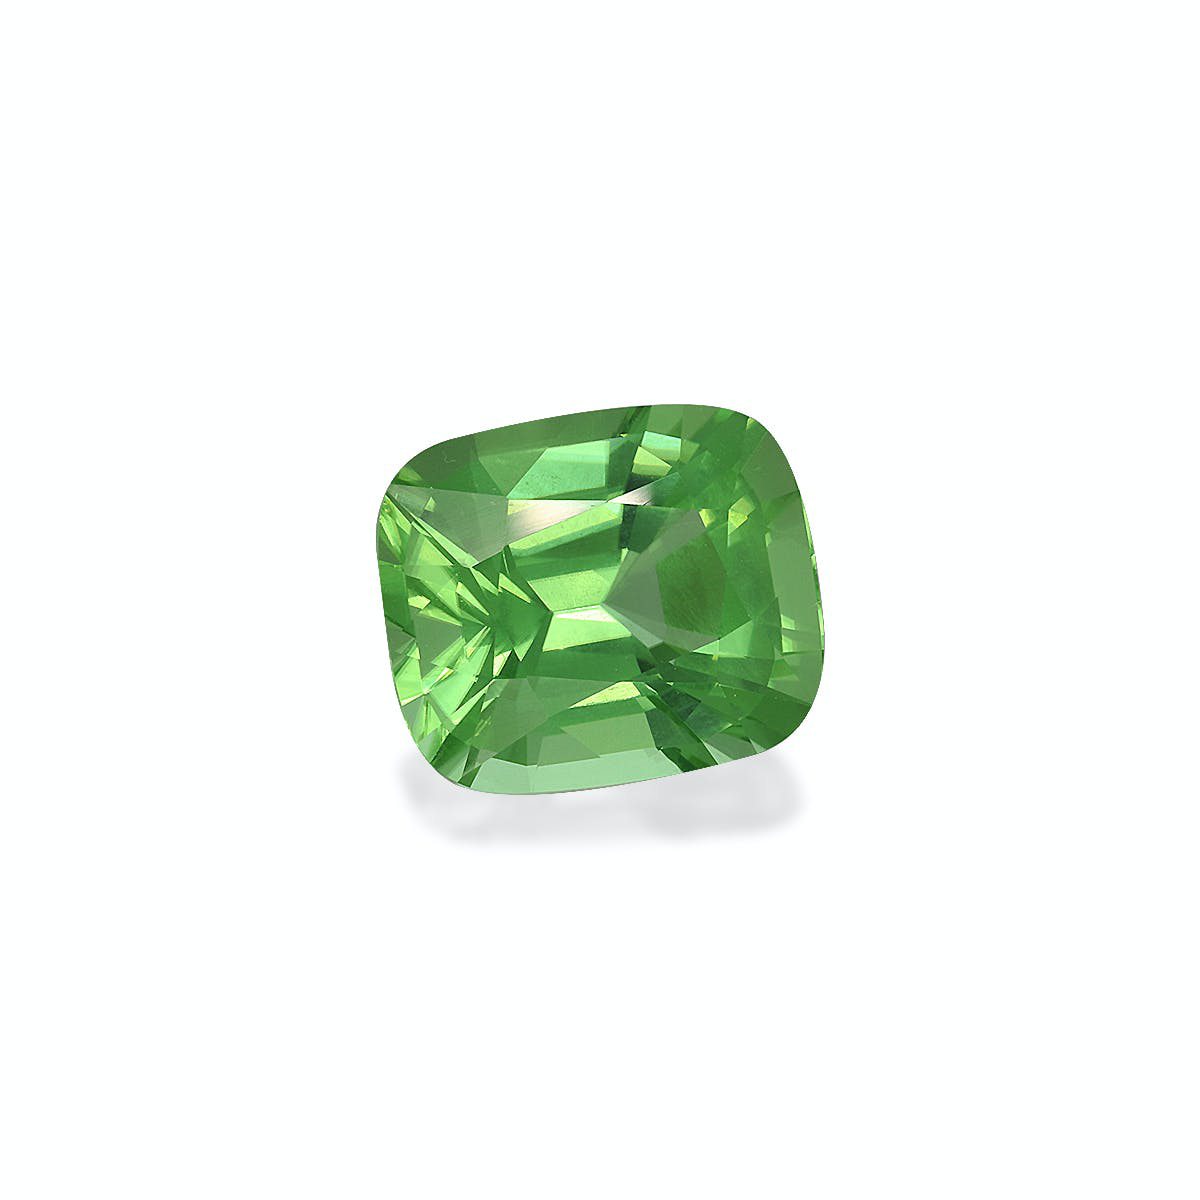 Picture of Green Peridot 8.94ct - 13x11mm (PD0221)